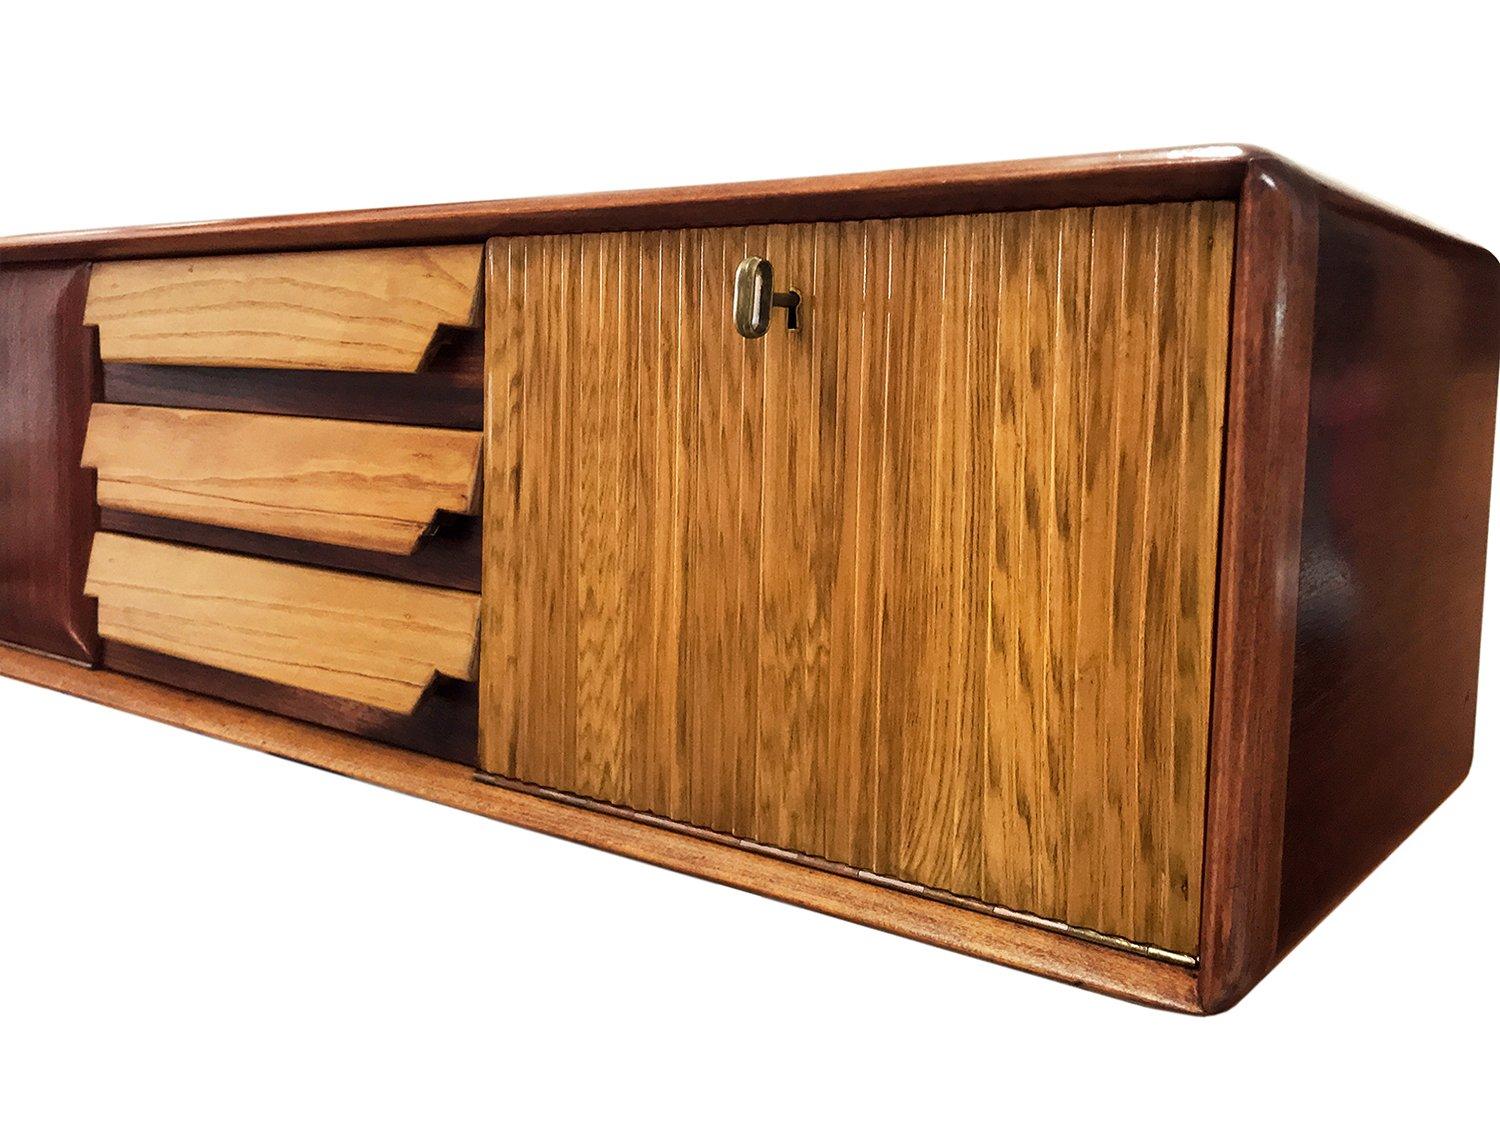 Teak Italian Mid-Century Wall Mounted Sideboard with Drawers by Gio Ponti, 1950s